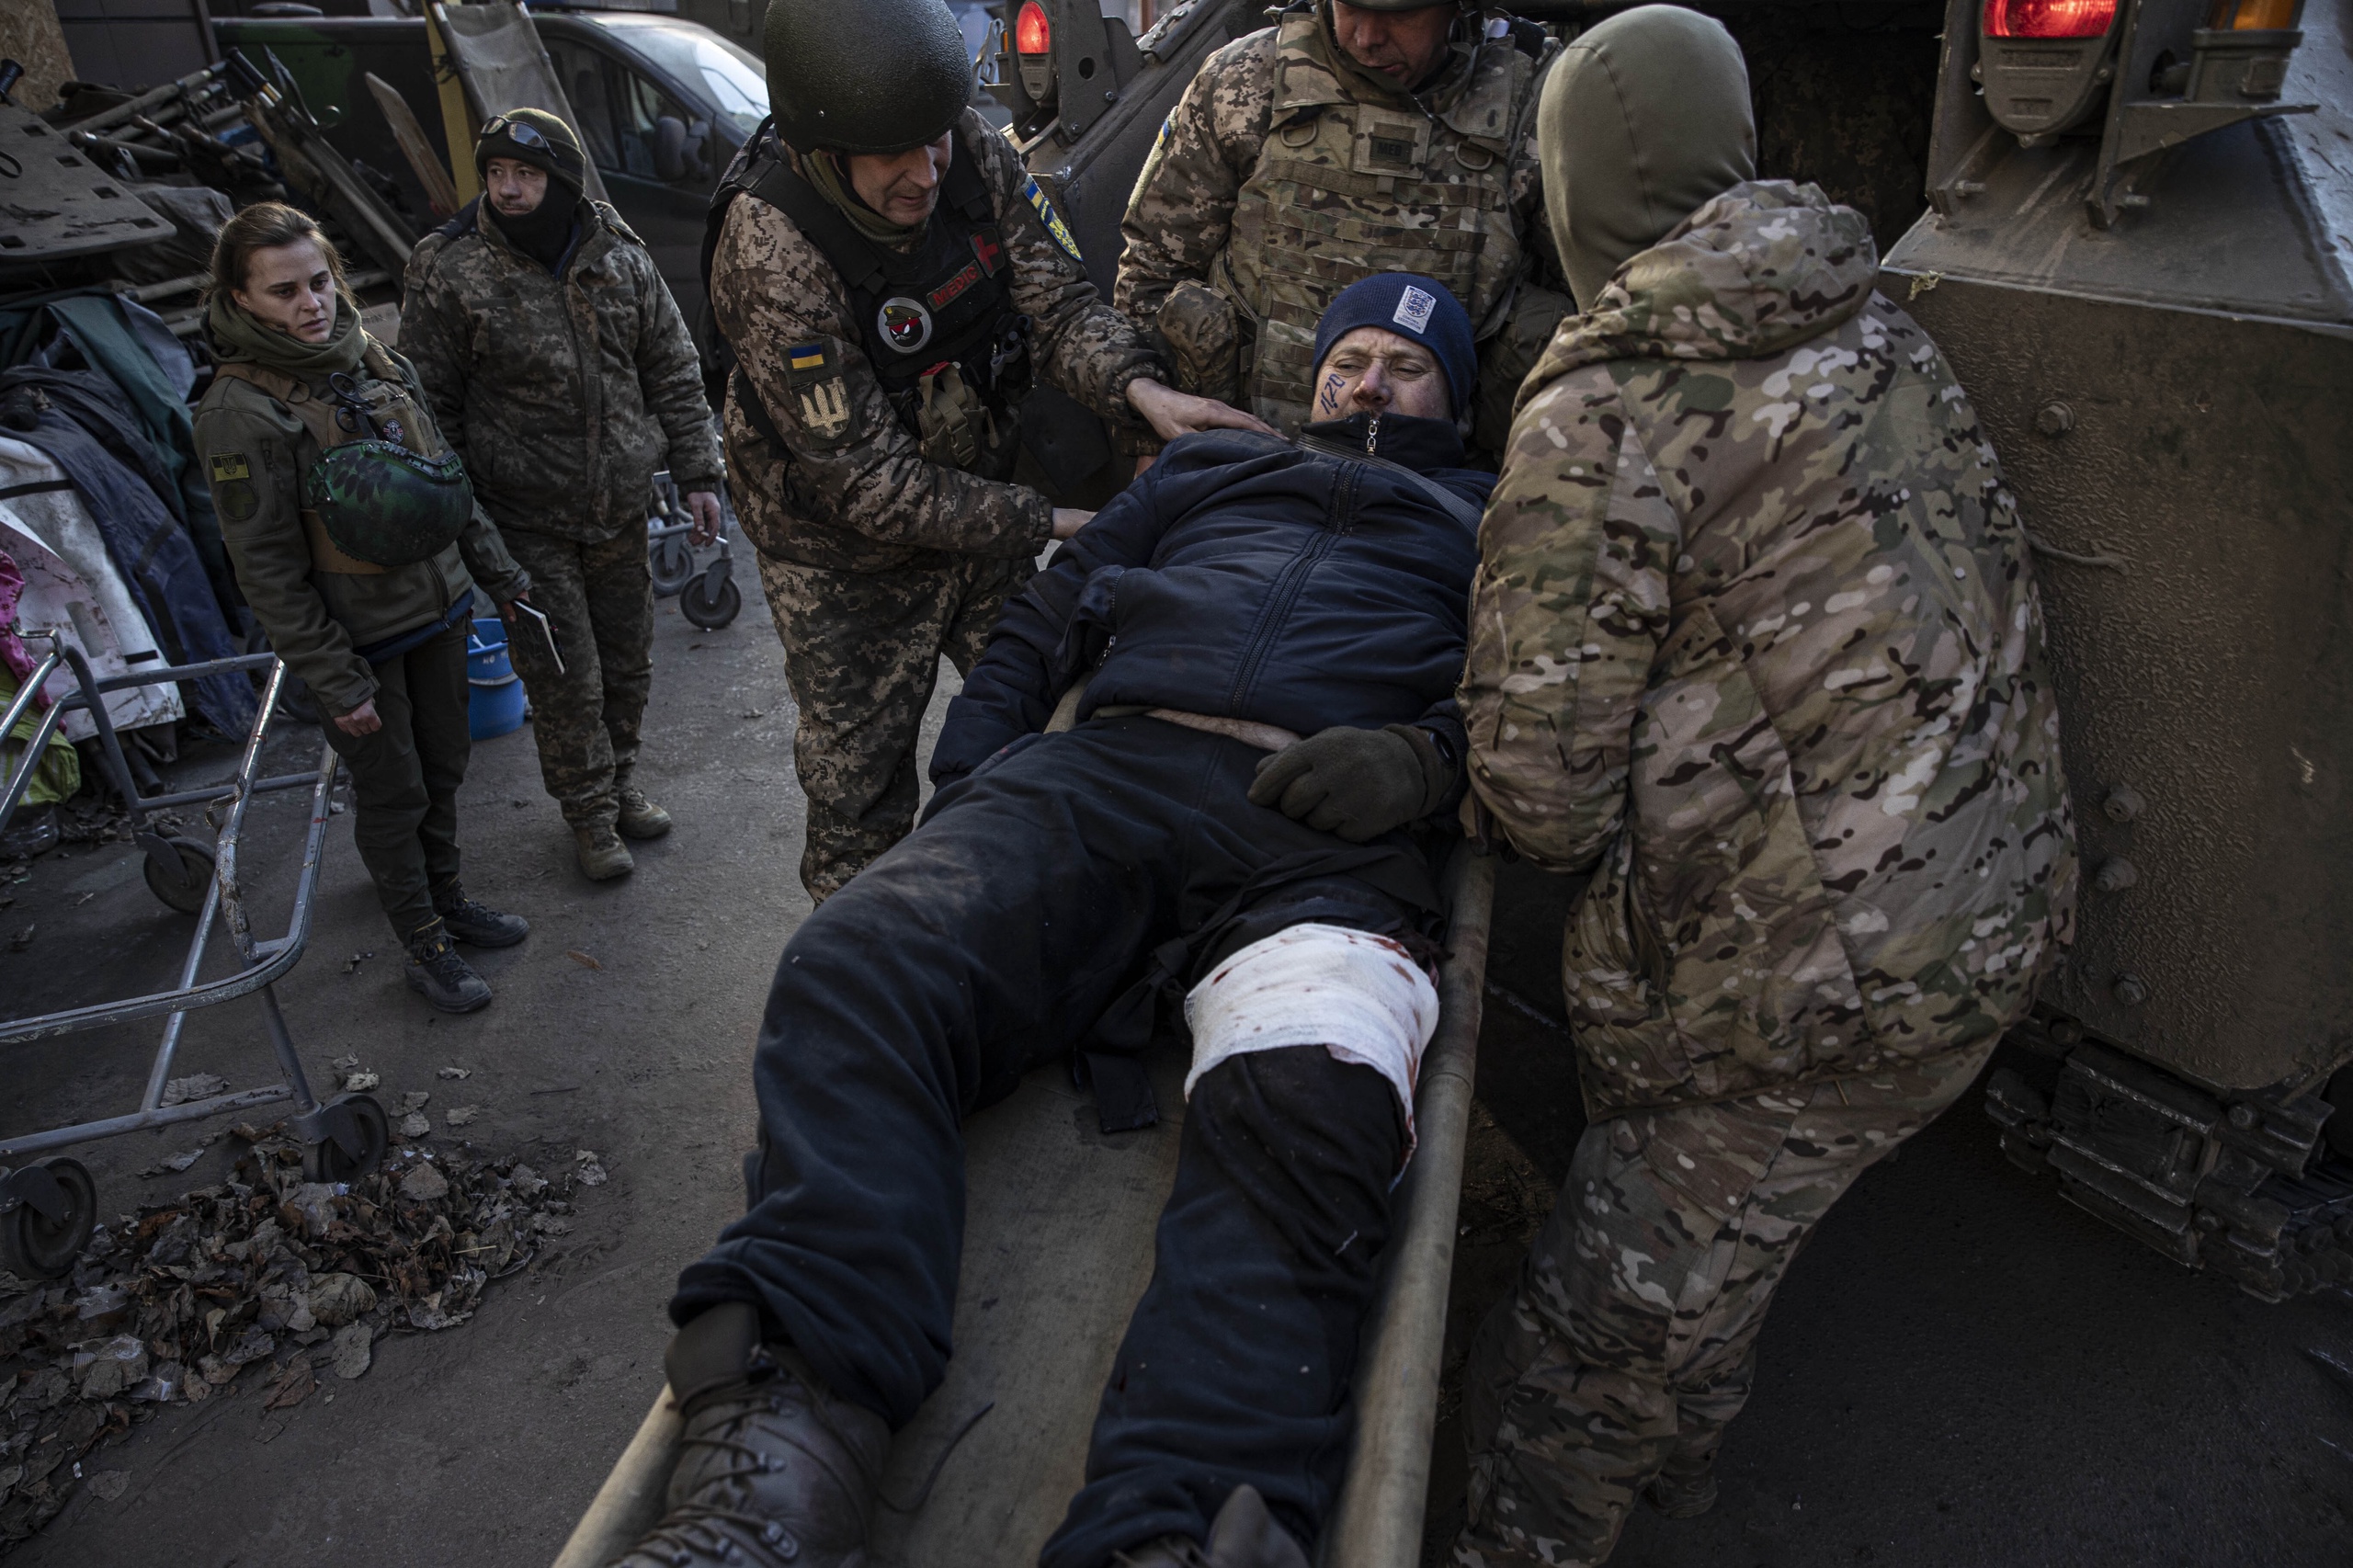 A wounded Ukrainian soldier.